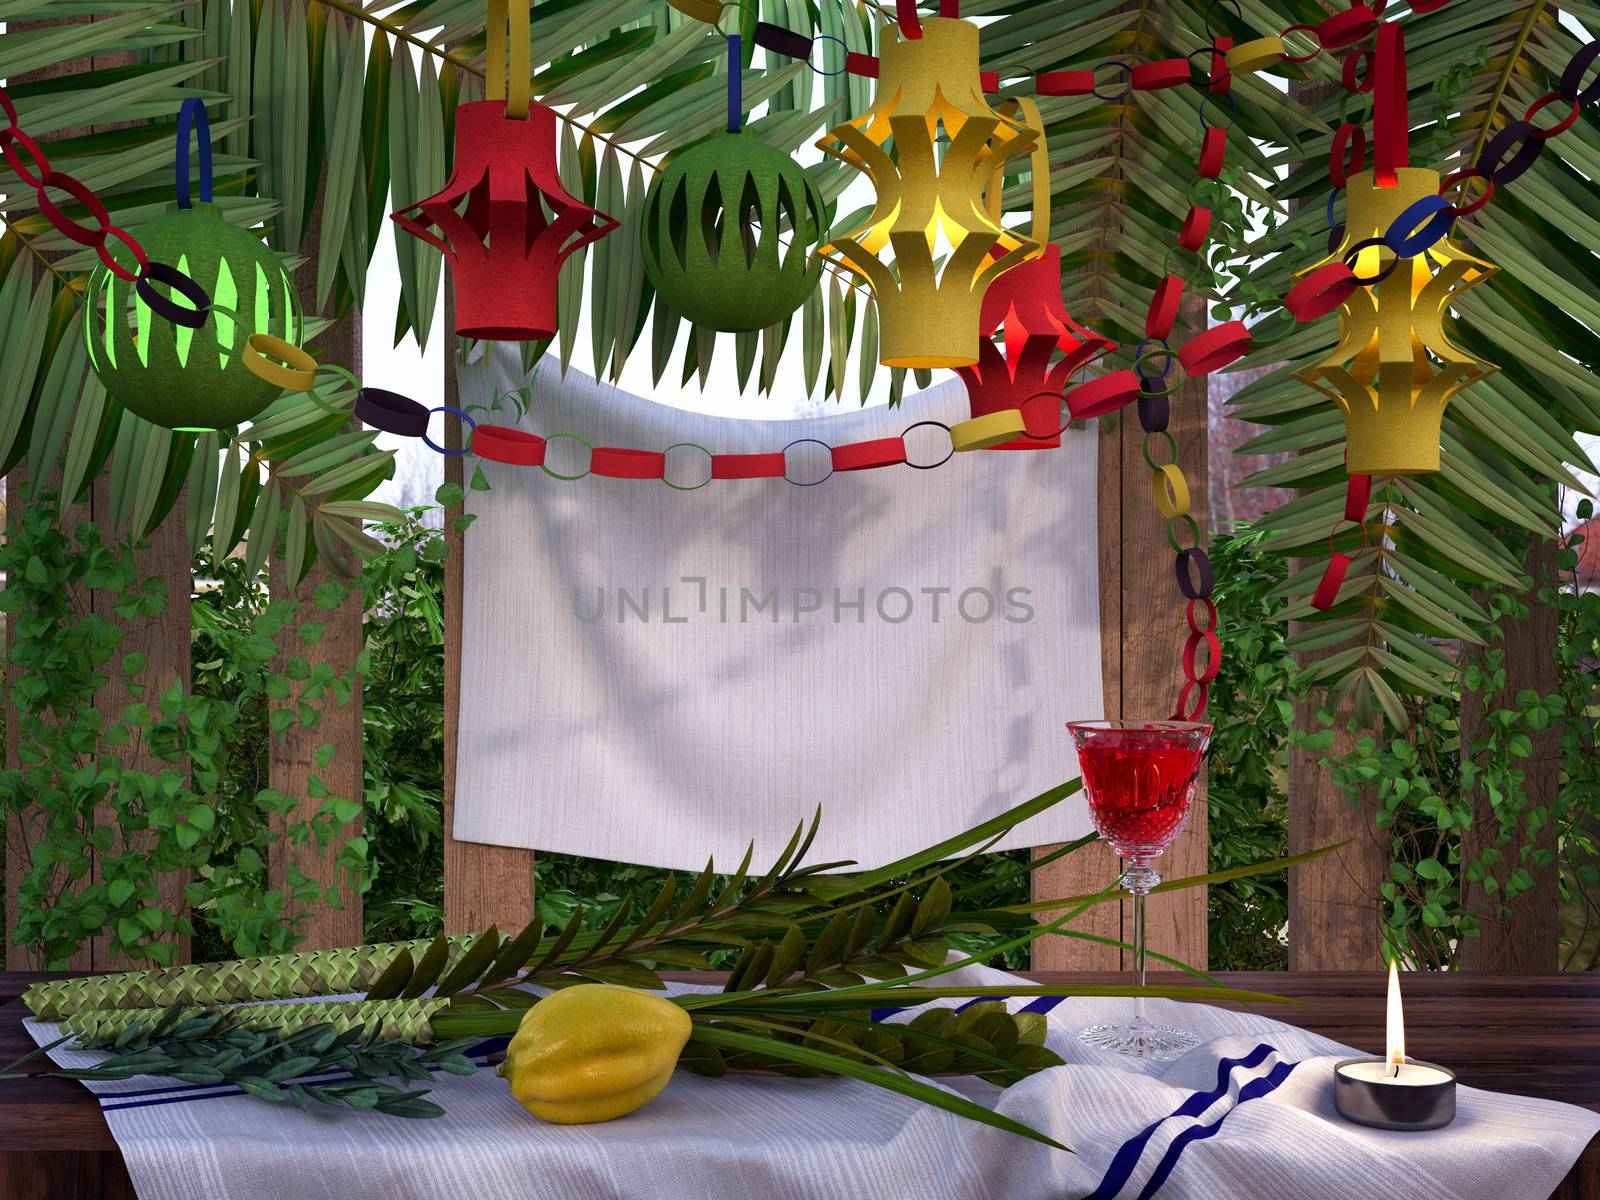 Symbols of the Jewish holiday Sukkot with palm leaves and candle by denisgo